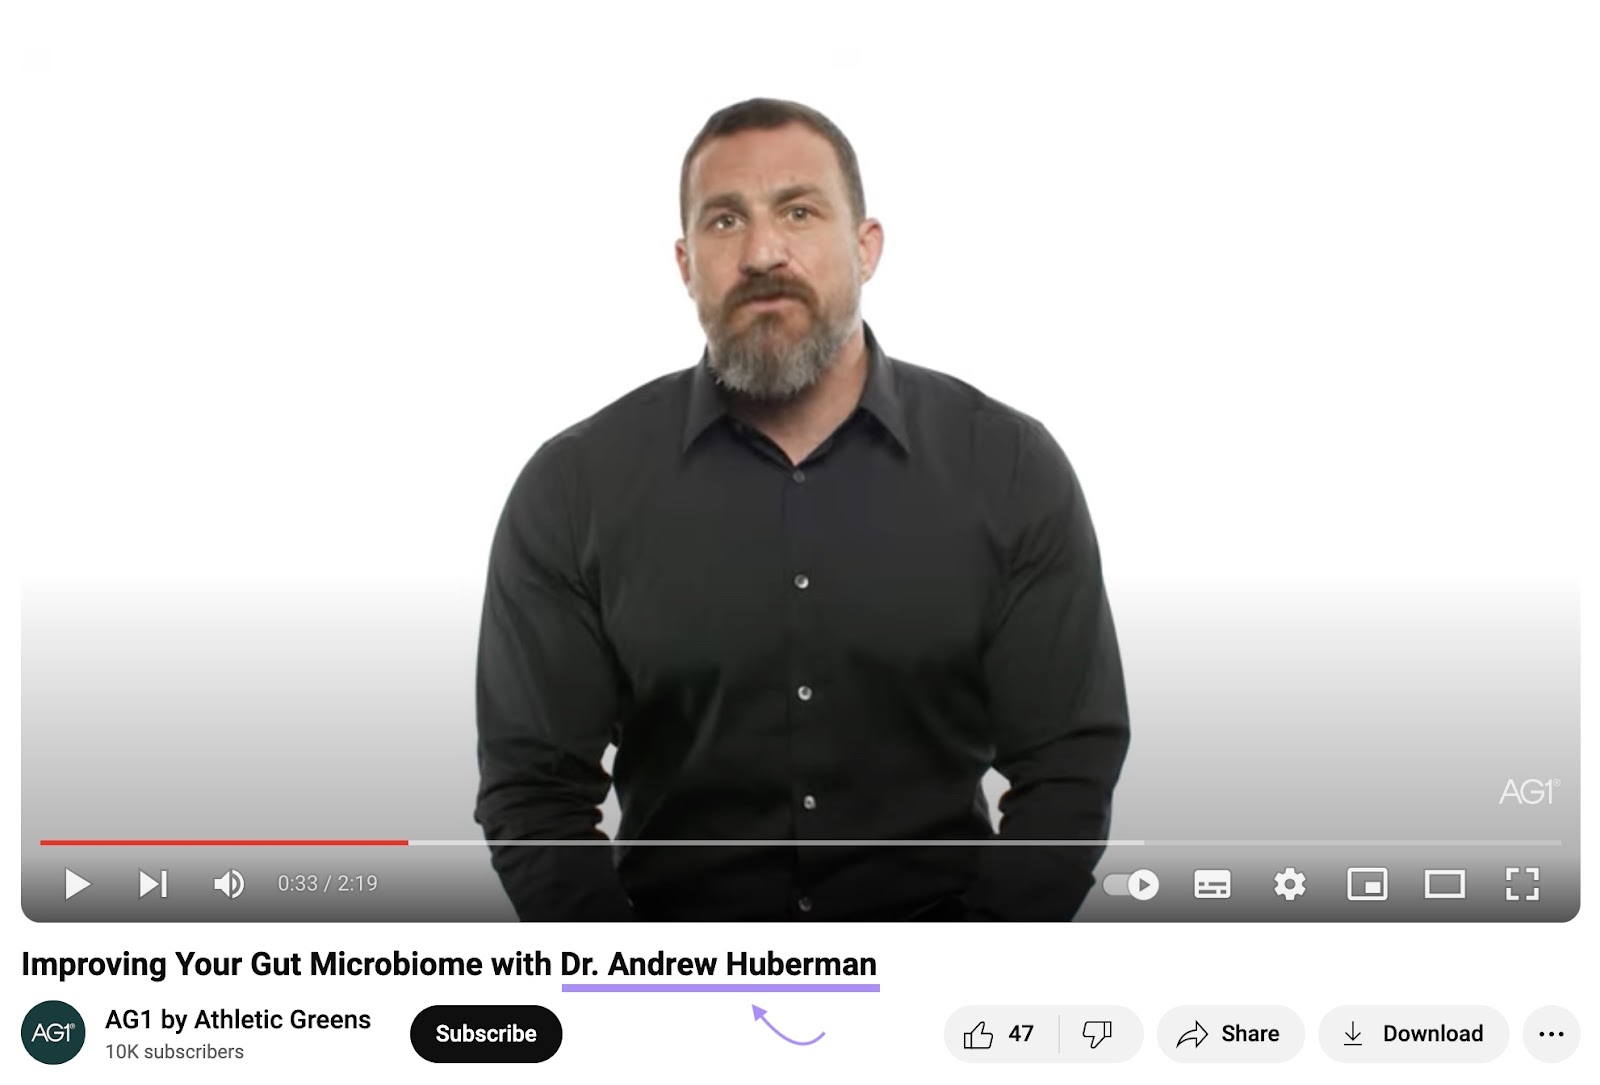 YouTube video from nutrition institution  Athletic Greens connected  improving your gut microbiome